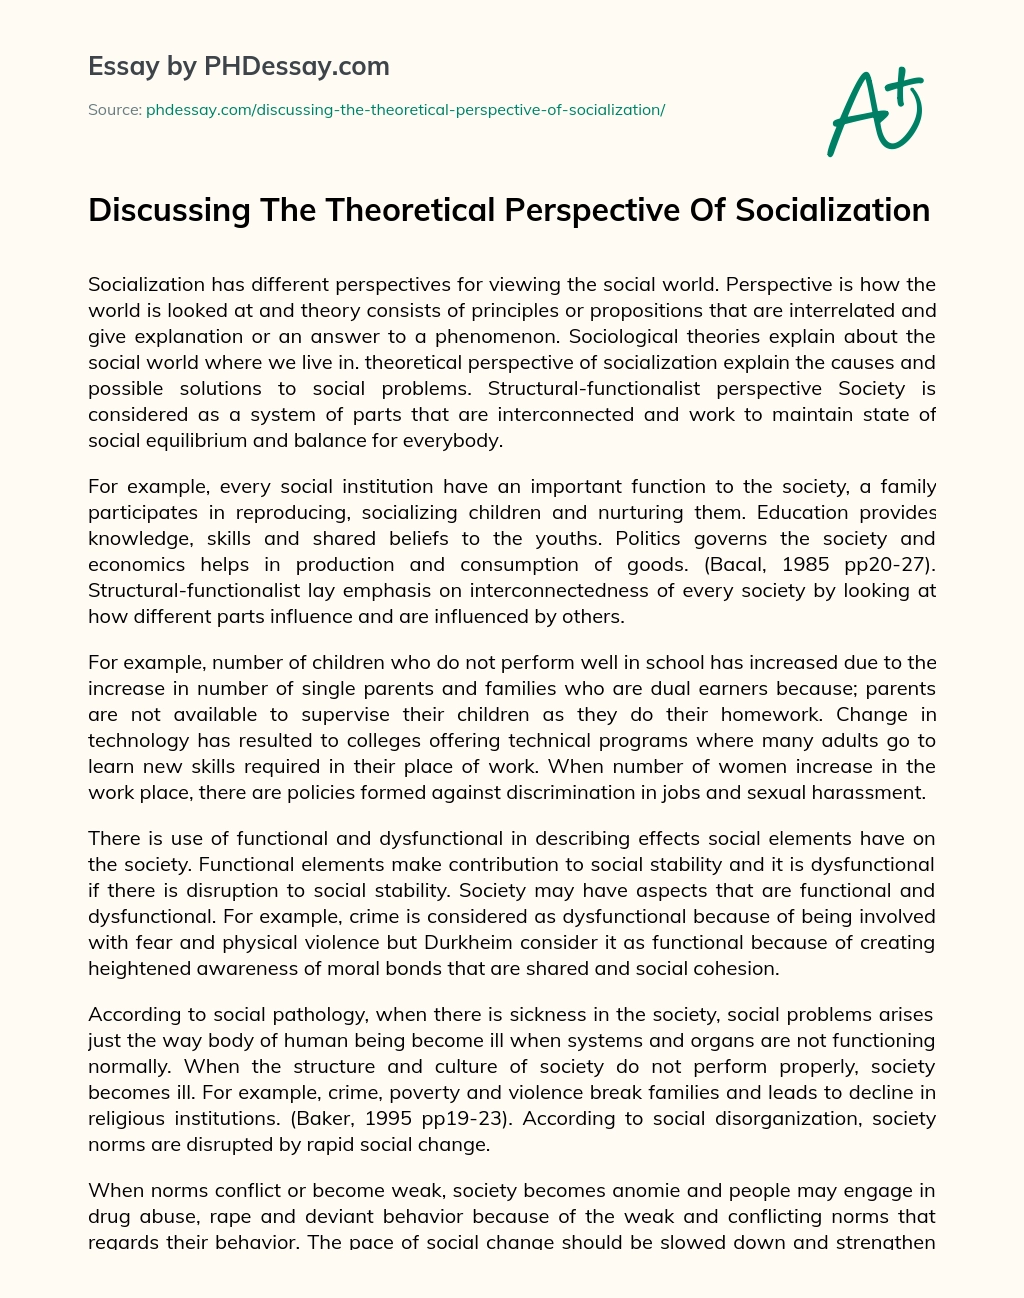 Discussing The Theoretical Perspective Of Socialization essay